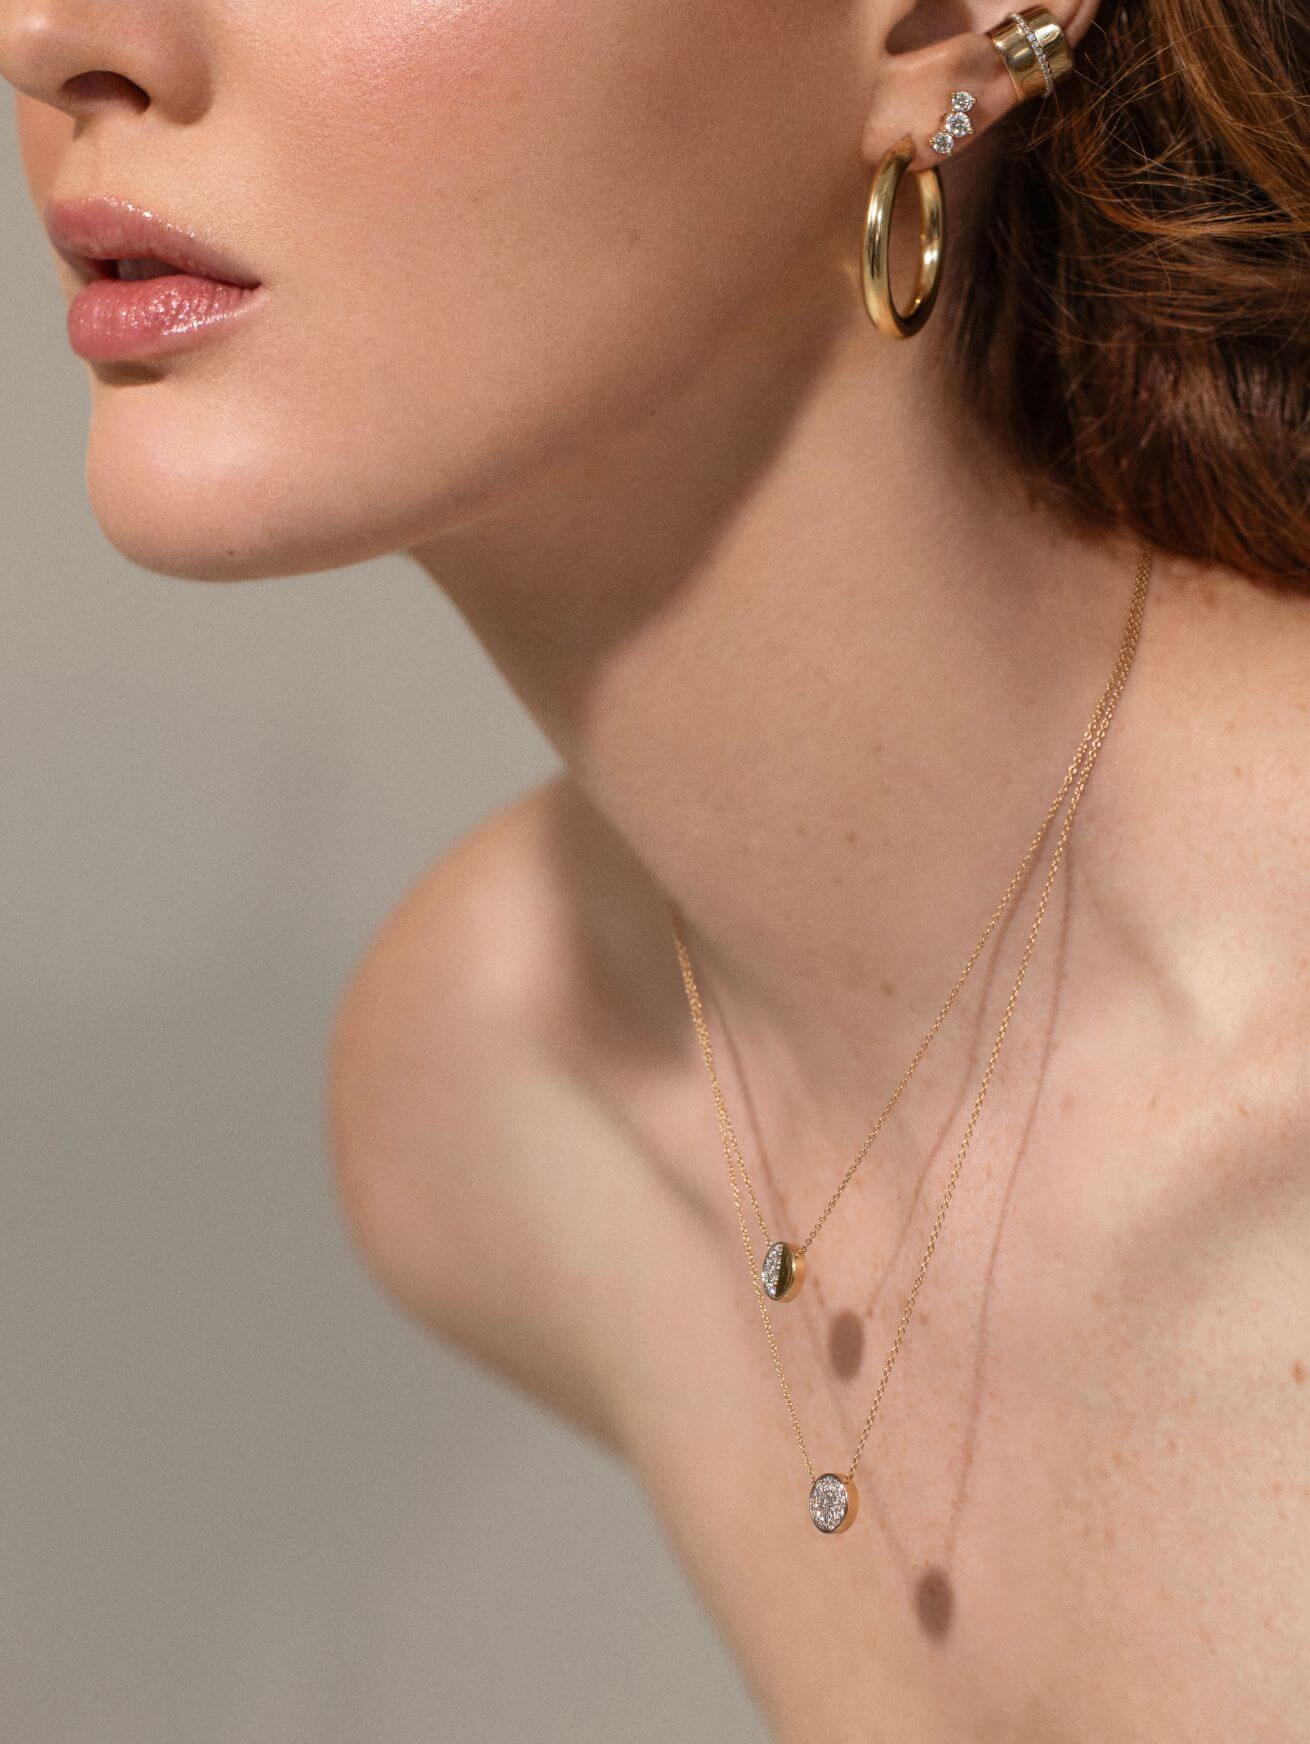 close up of woman wearing Marrow earrings and 2 layered Moon Phase pendants